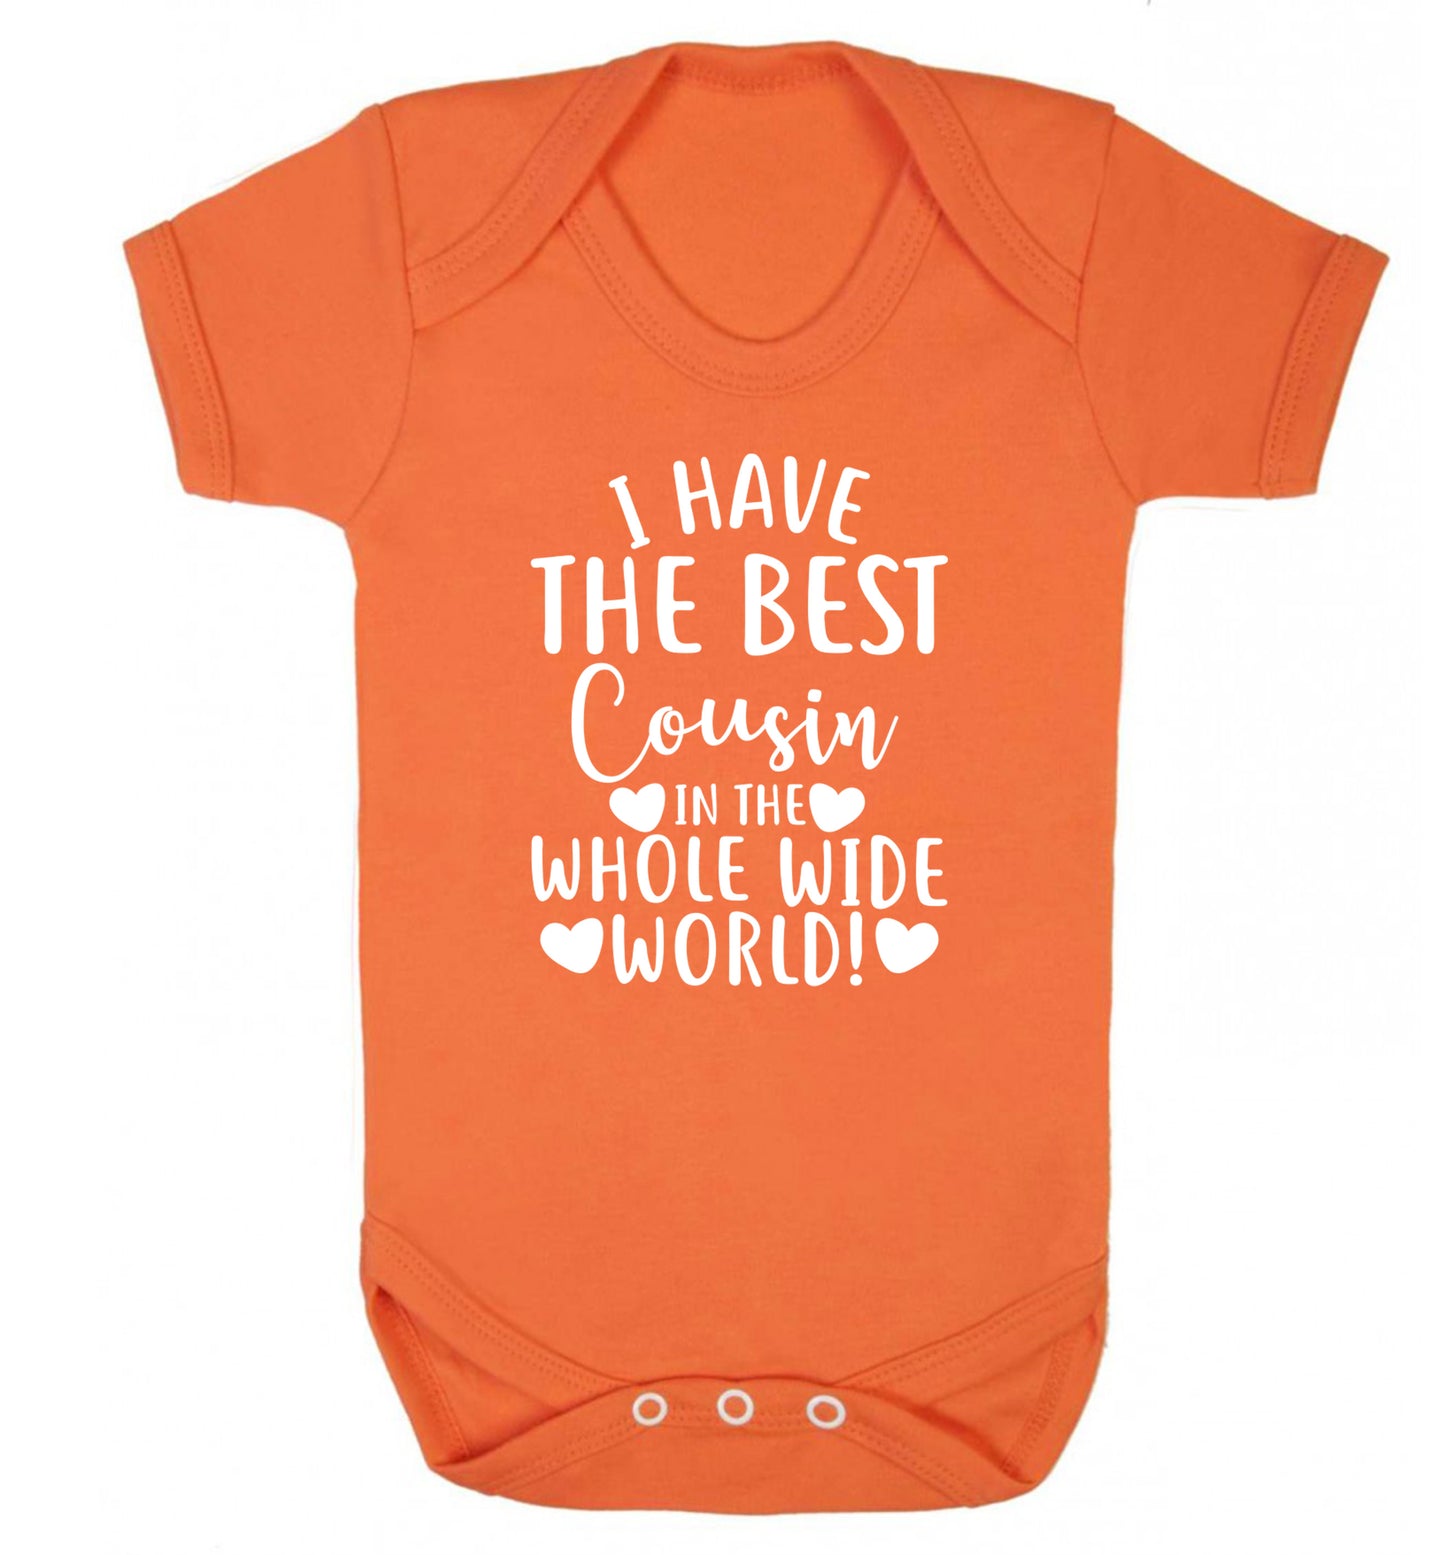 I have the best cousin in the whole wide world! Baby Vest orange 18-24 months